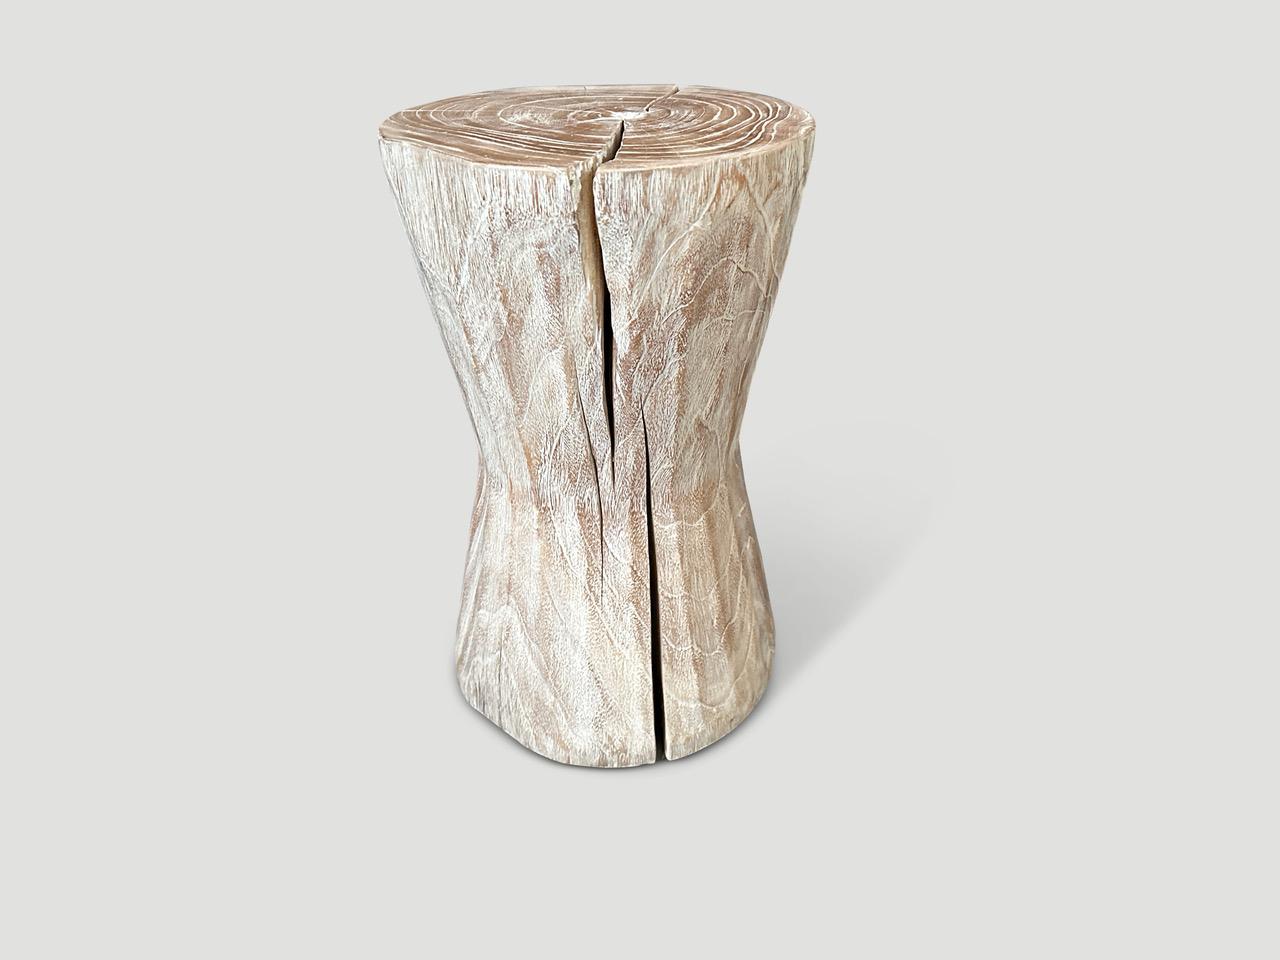 Contemporary Andrianna Shamaris Bevelled Teak Wood Side Table or Stool For Sale